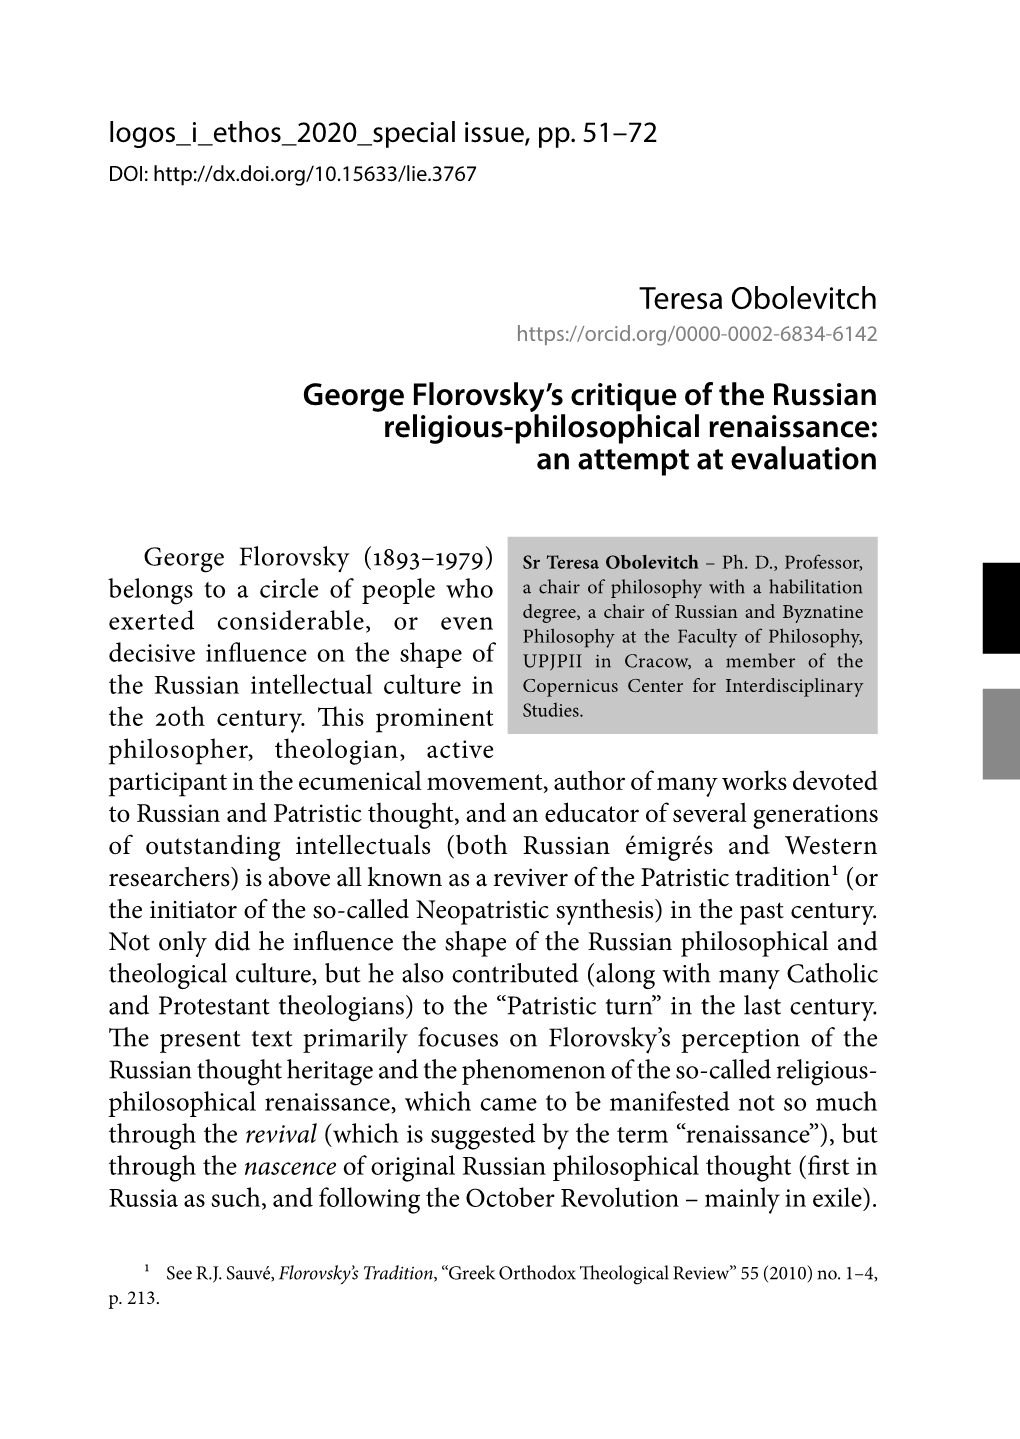 George Florovsky's Critique of the Russian Religious-Philosophical